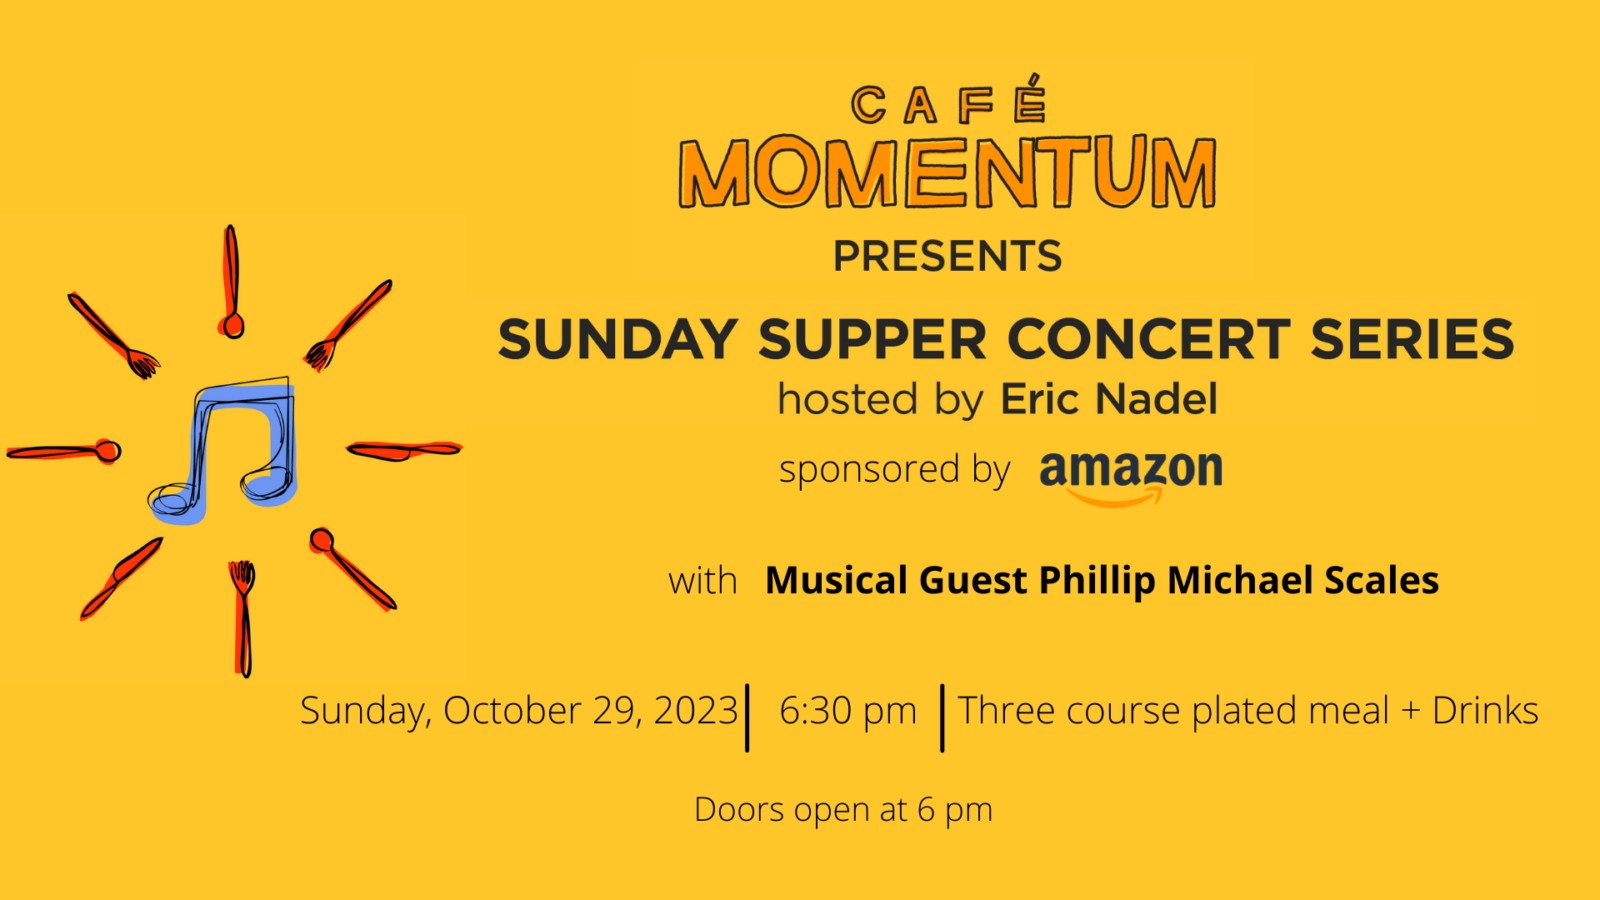 Sunday Supper Concert Series with Phillip-Michael Scales